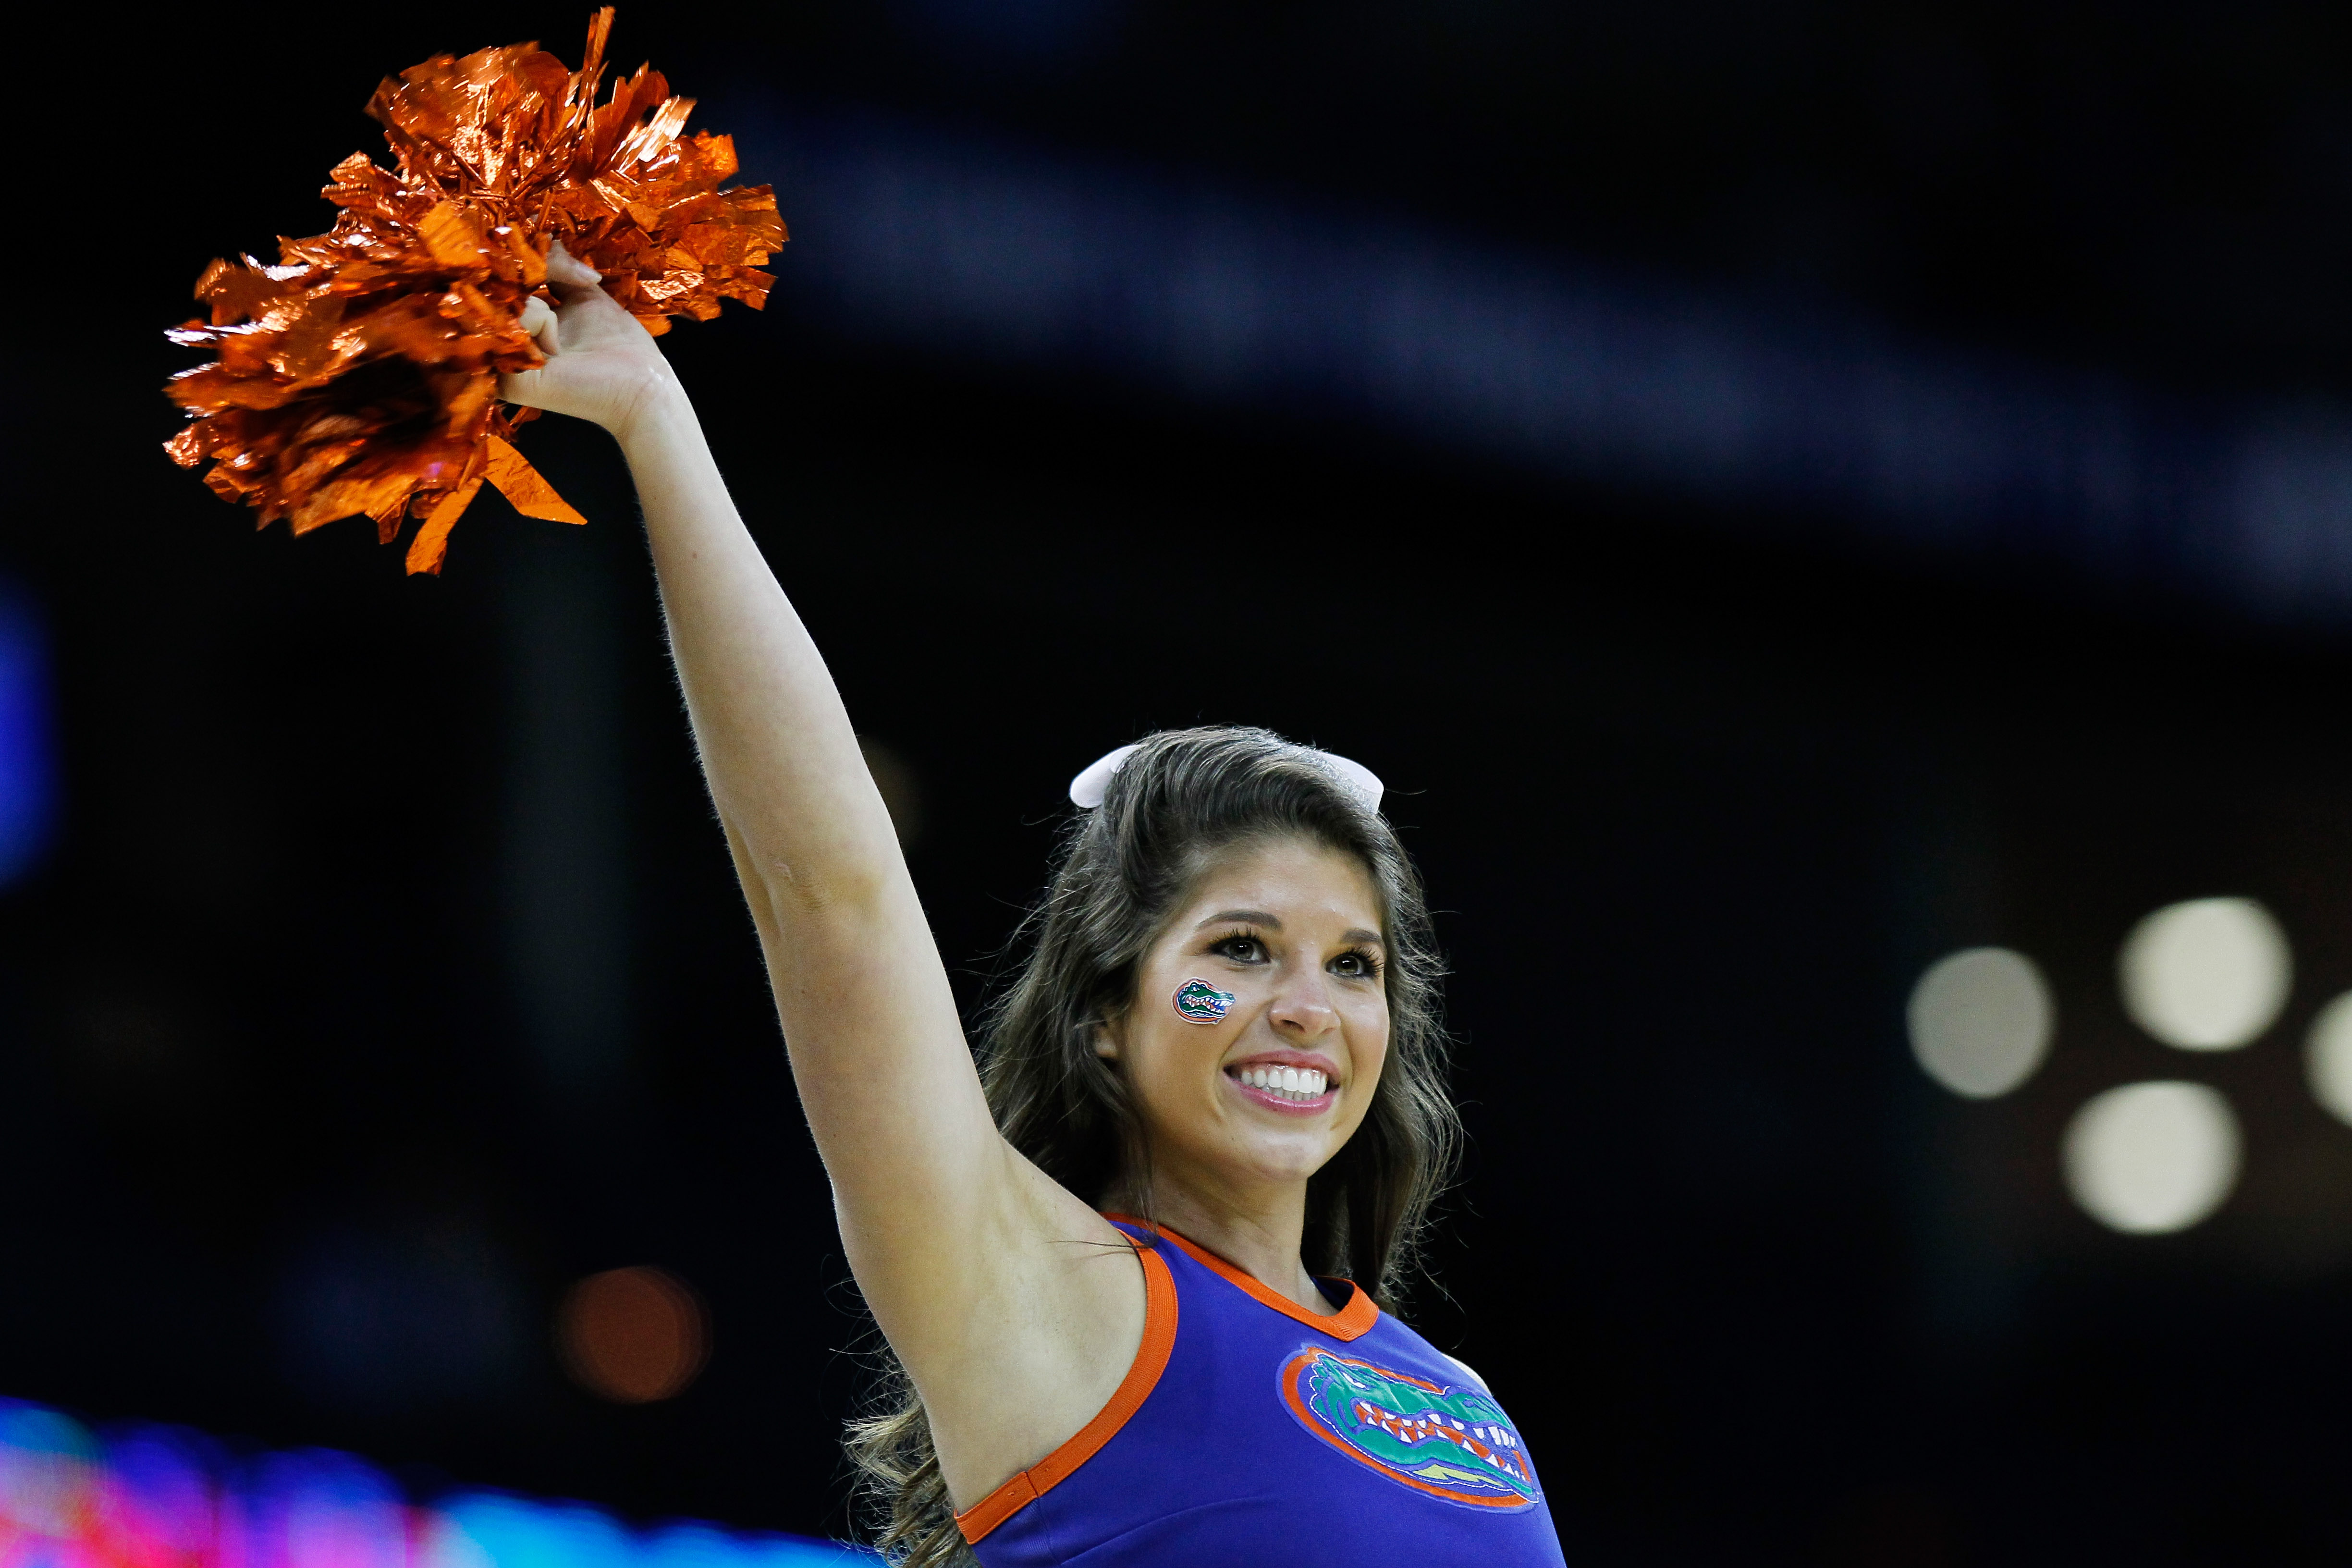 NEW ORLEANS, LA - MARCH 26:  An Florida Gators cheerleader performs during their game against the Butler Bulldogs in the Southeast regional final of the 2011 NCAA men's basketball tournament at New Orleans Arena on March 26, 2011 in New Orleans, Louisiana